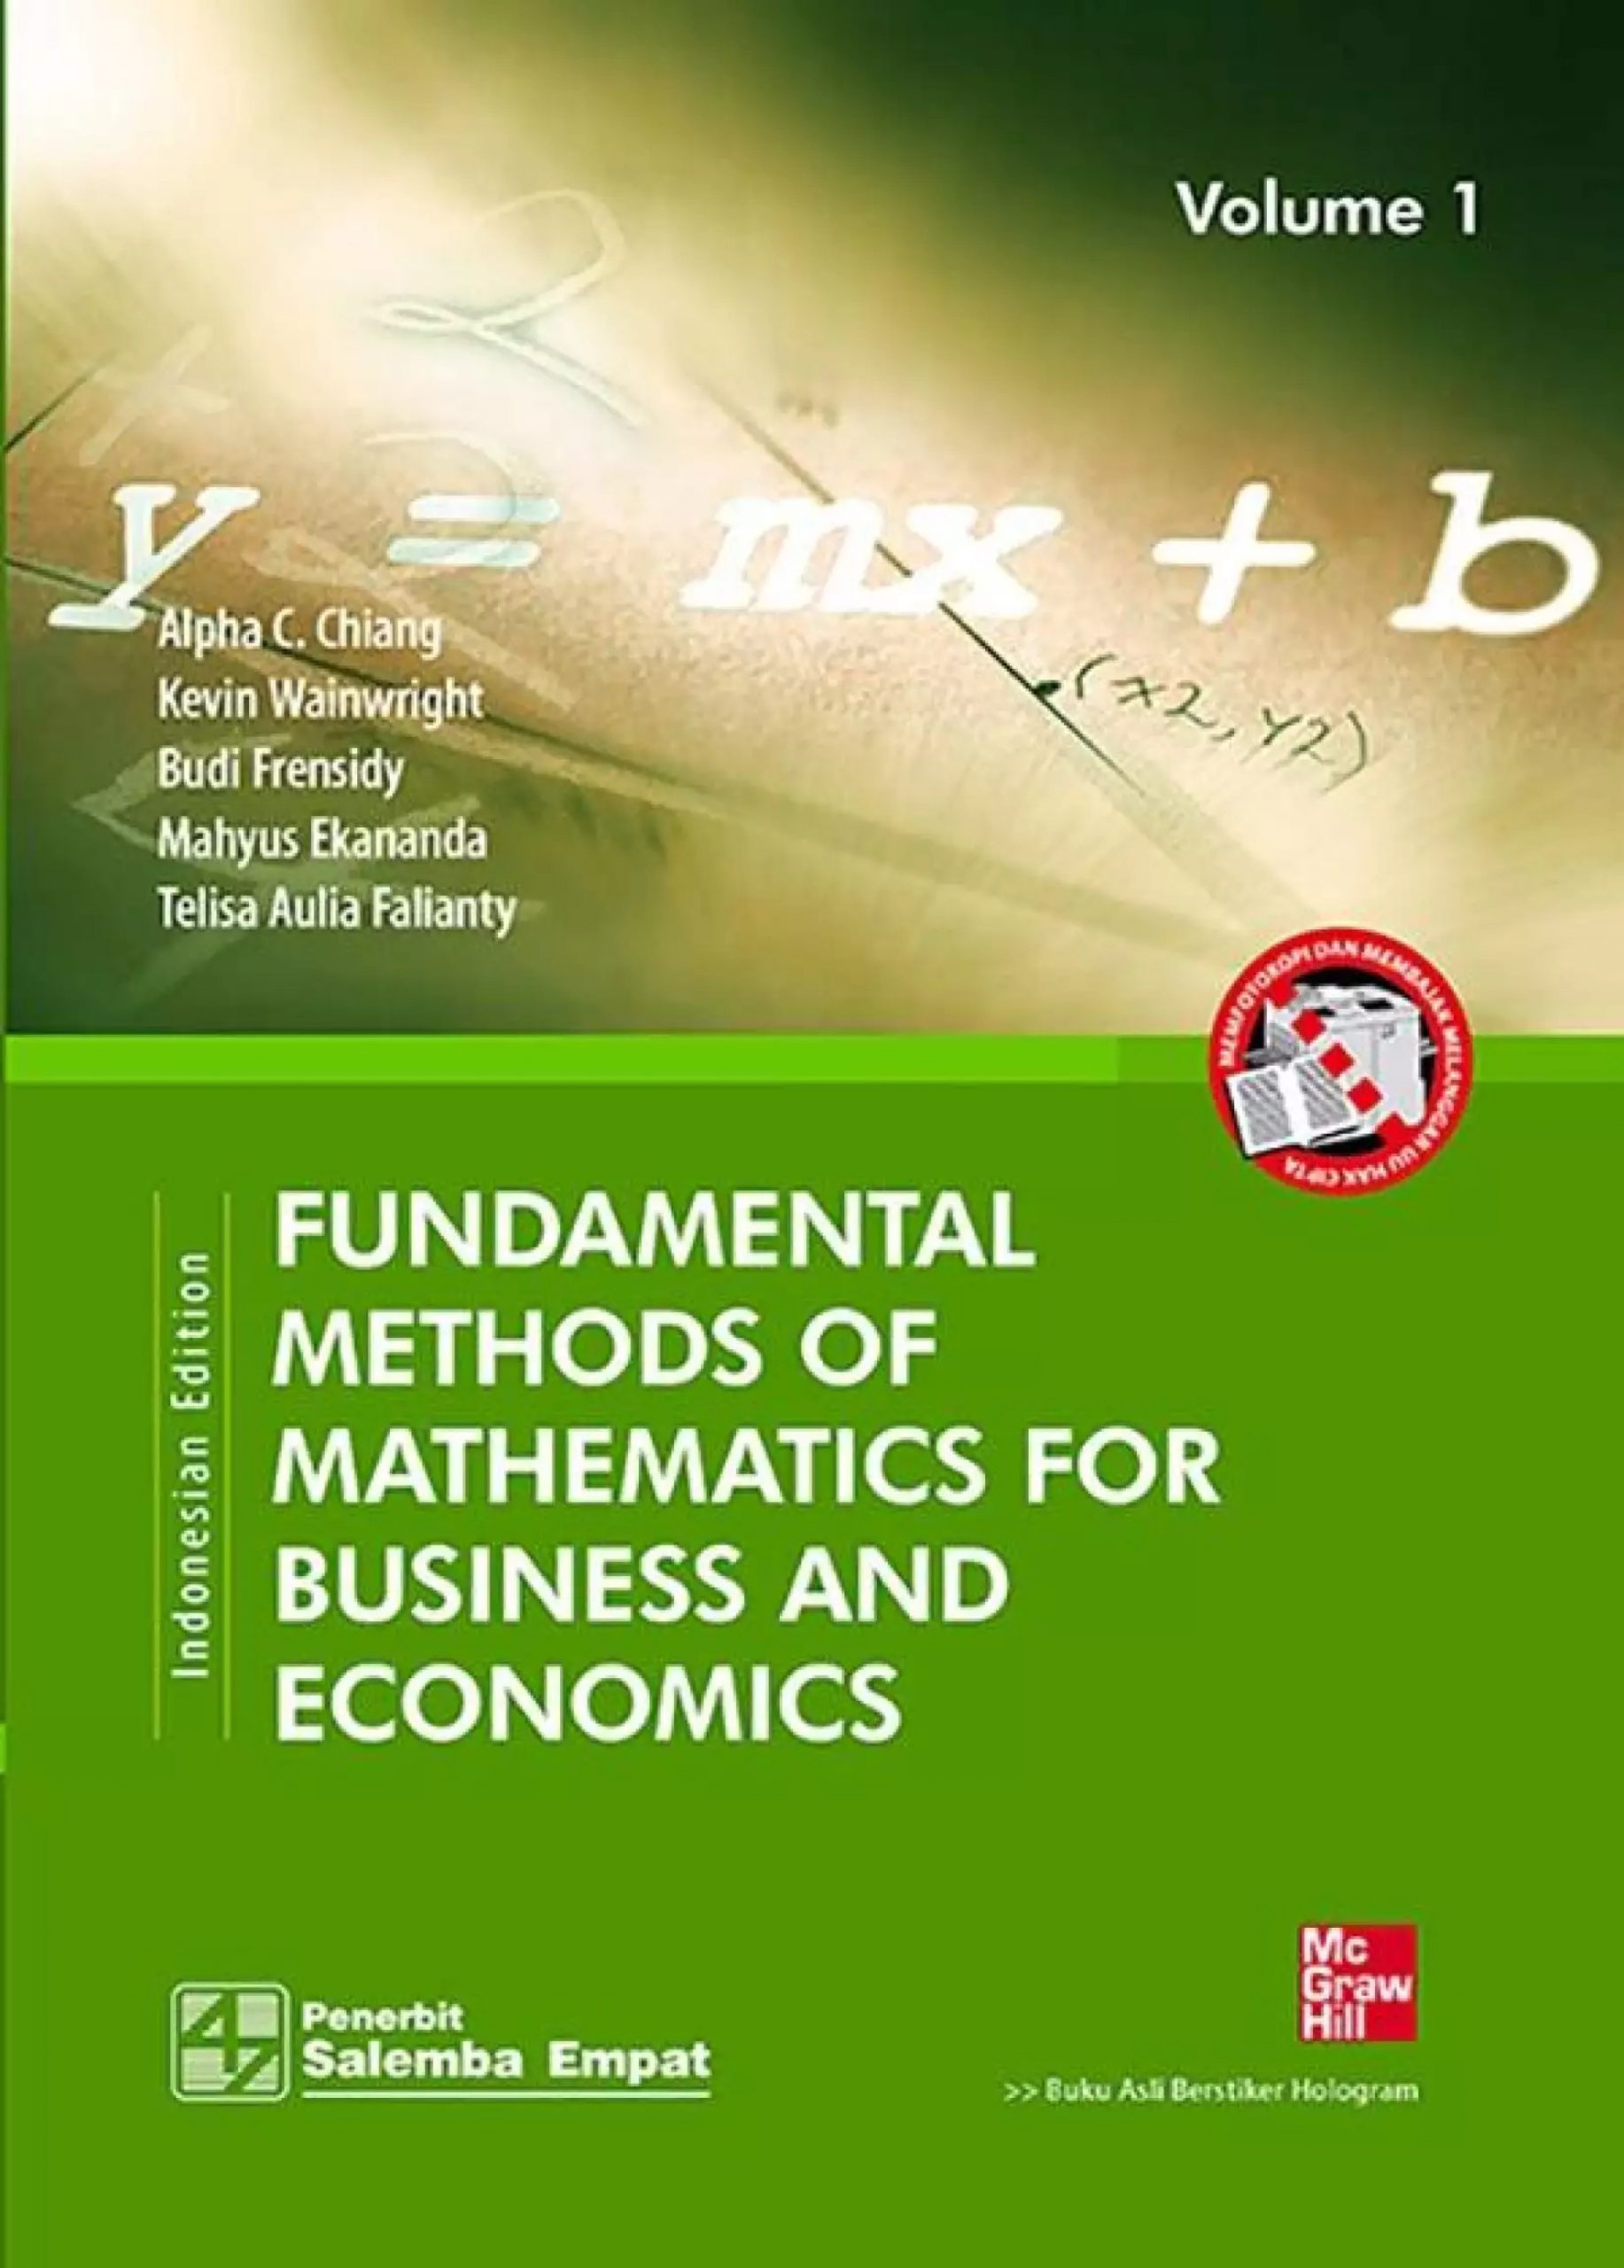 11Fundamental Methods Of Mathematics For Business And Economics, Indonesian Edition Vol. 1